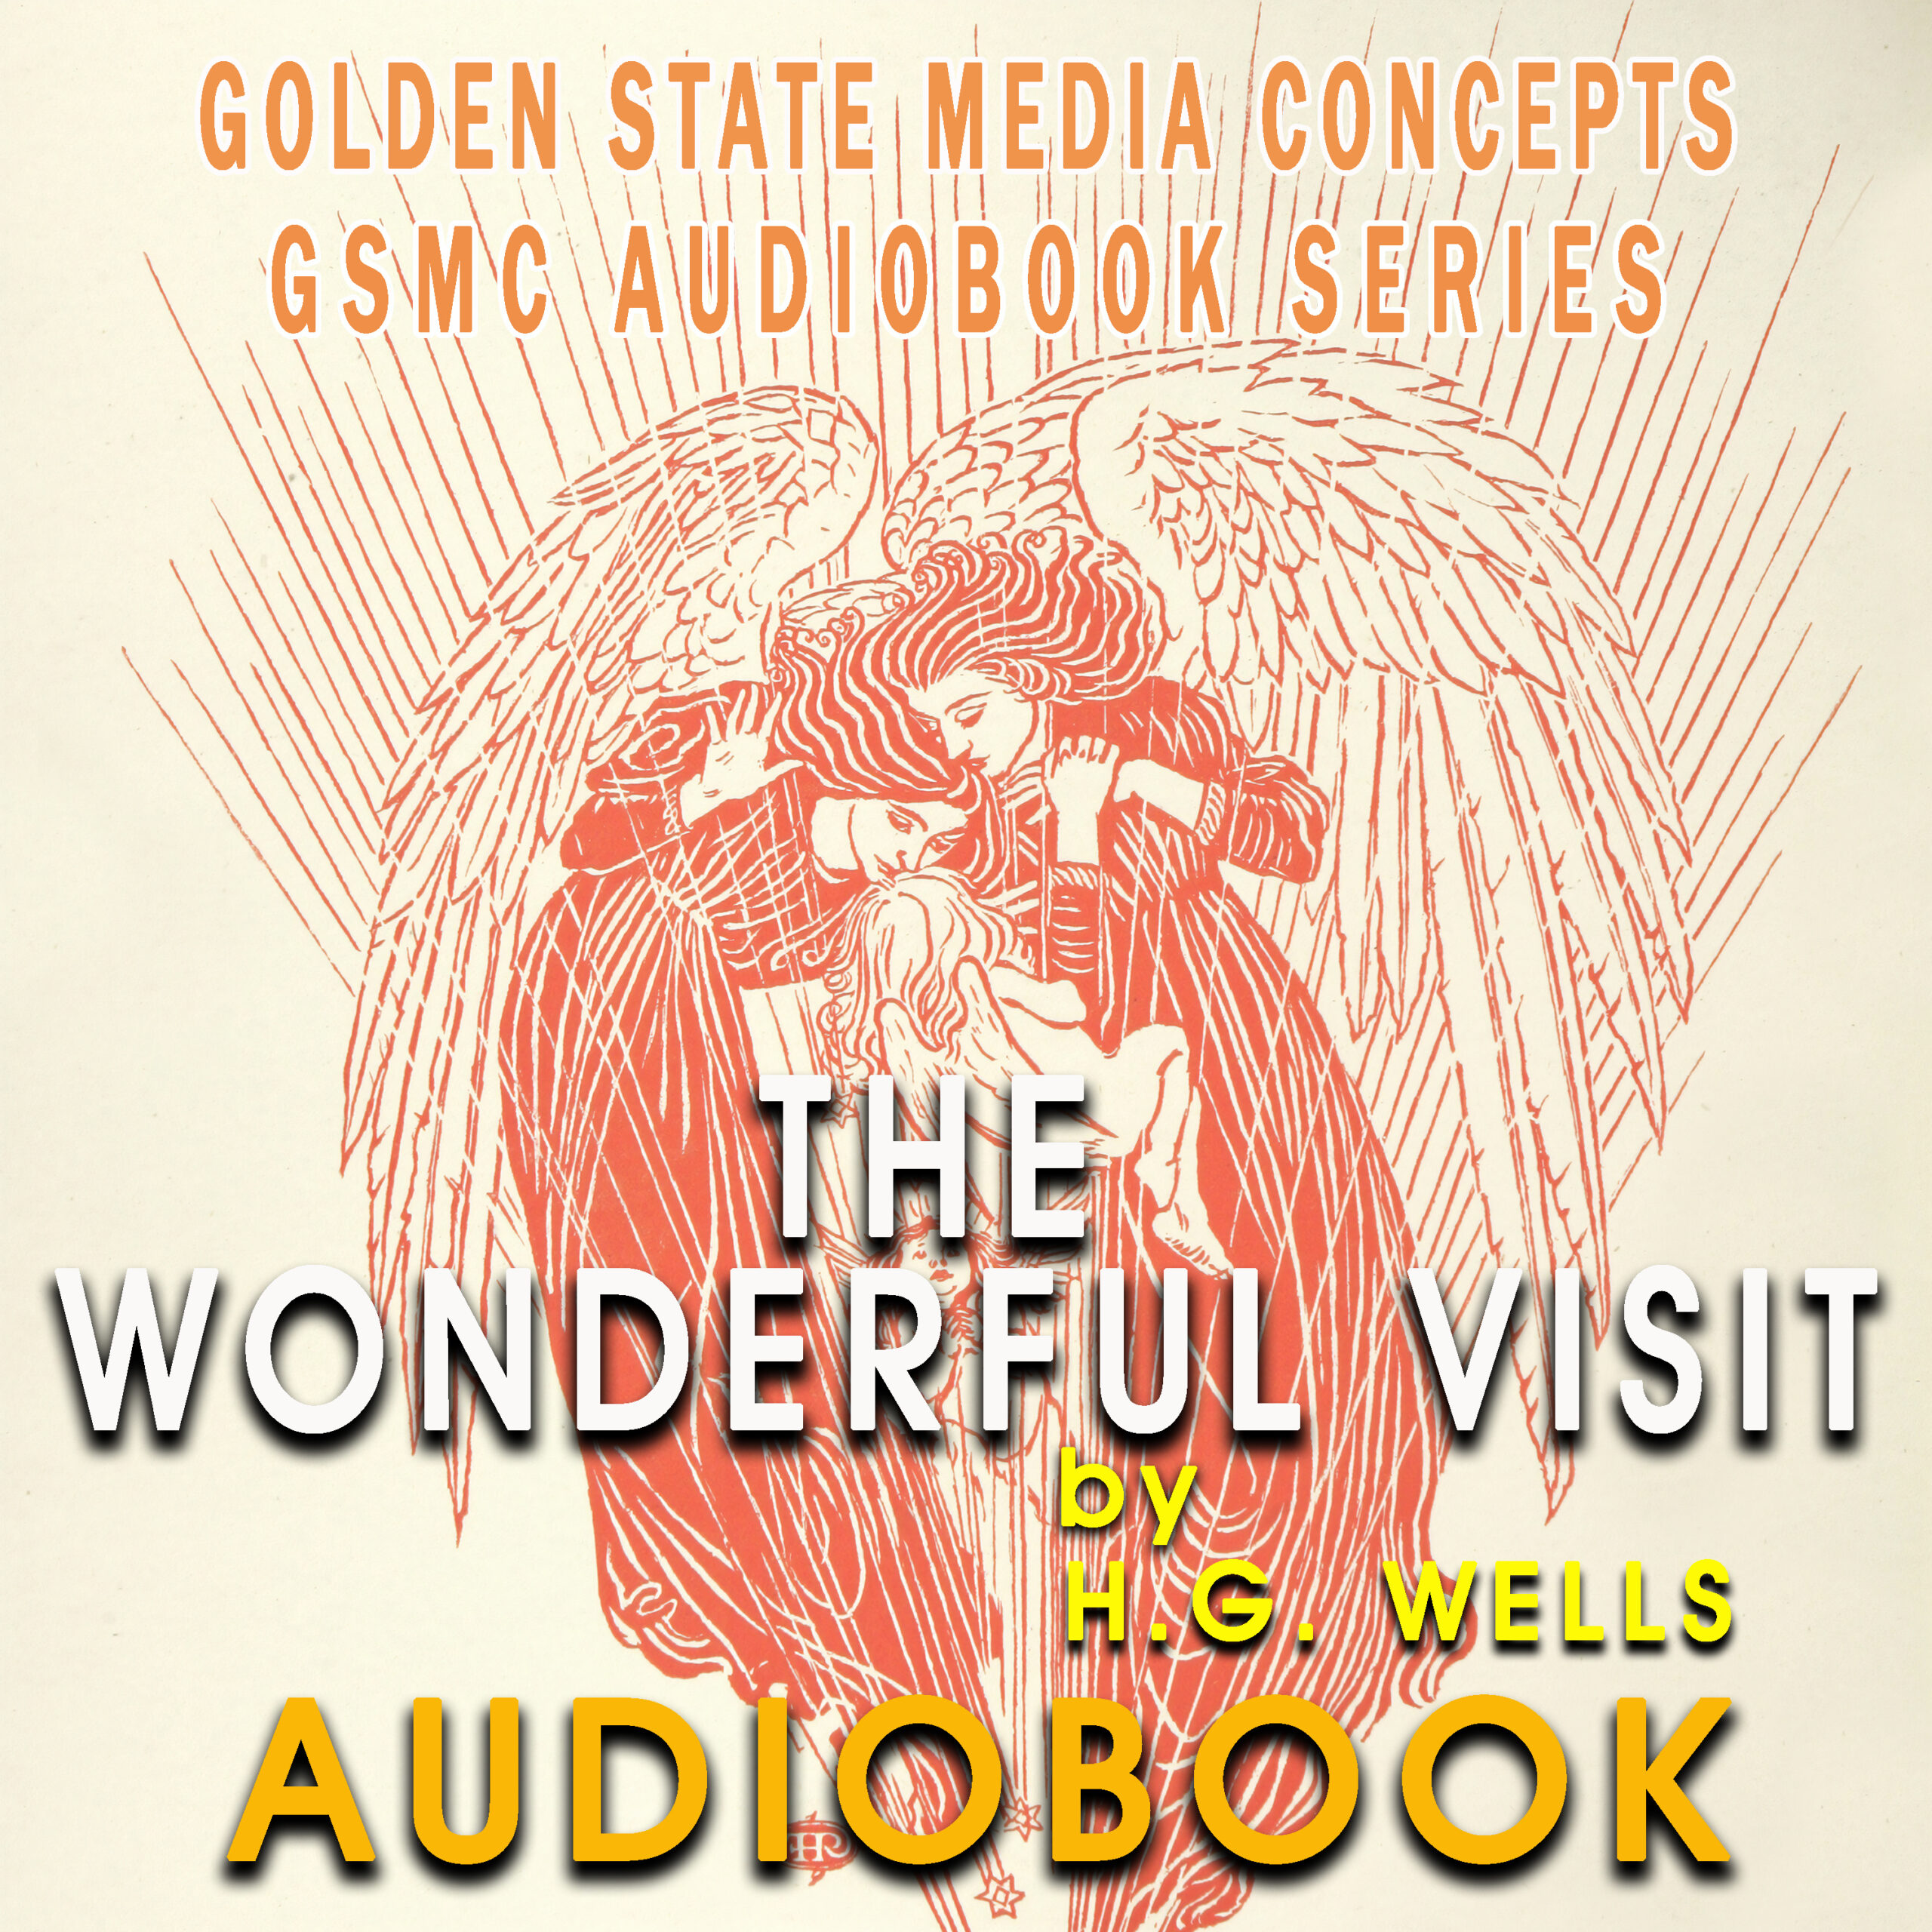 GSMC Audiobook Series: The Wonderful Visit by H.G. Wells